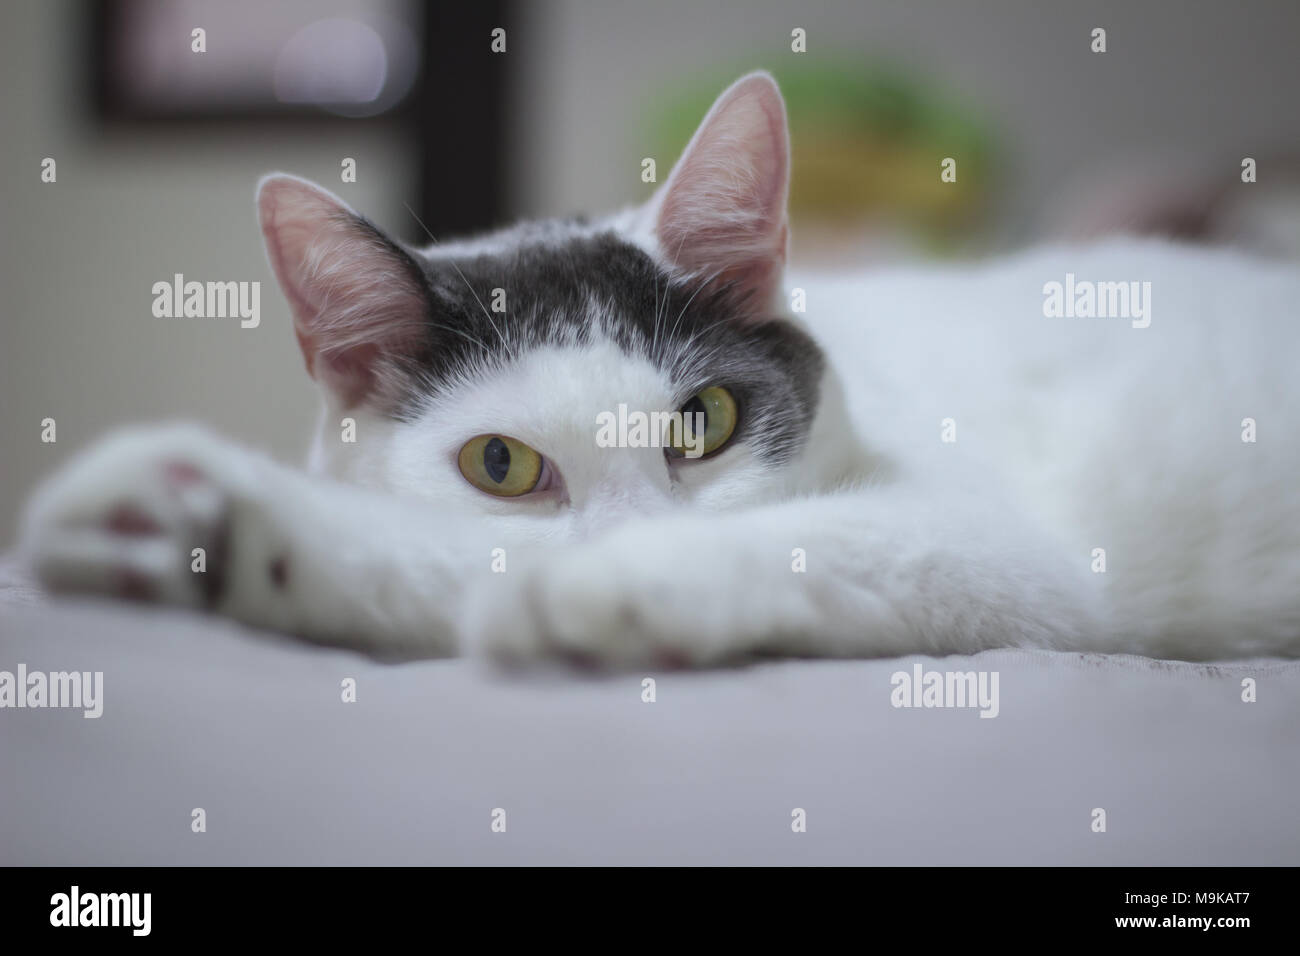 A cat lying on bed Stock Photo